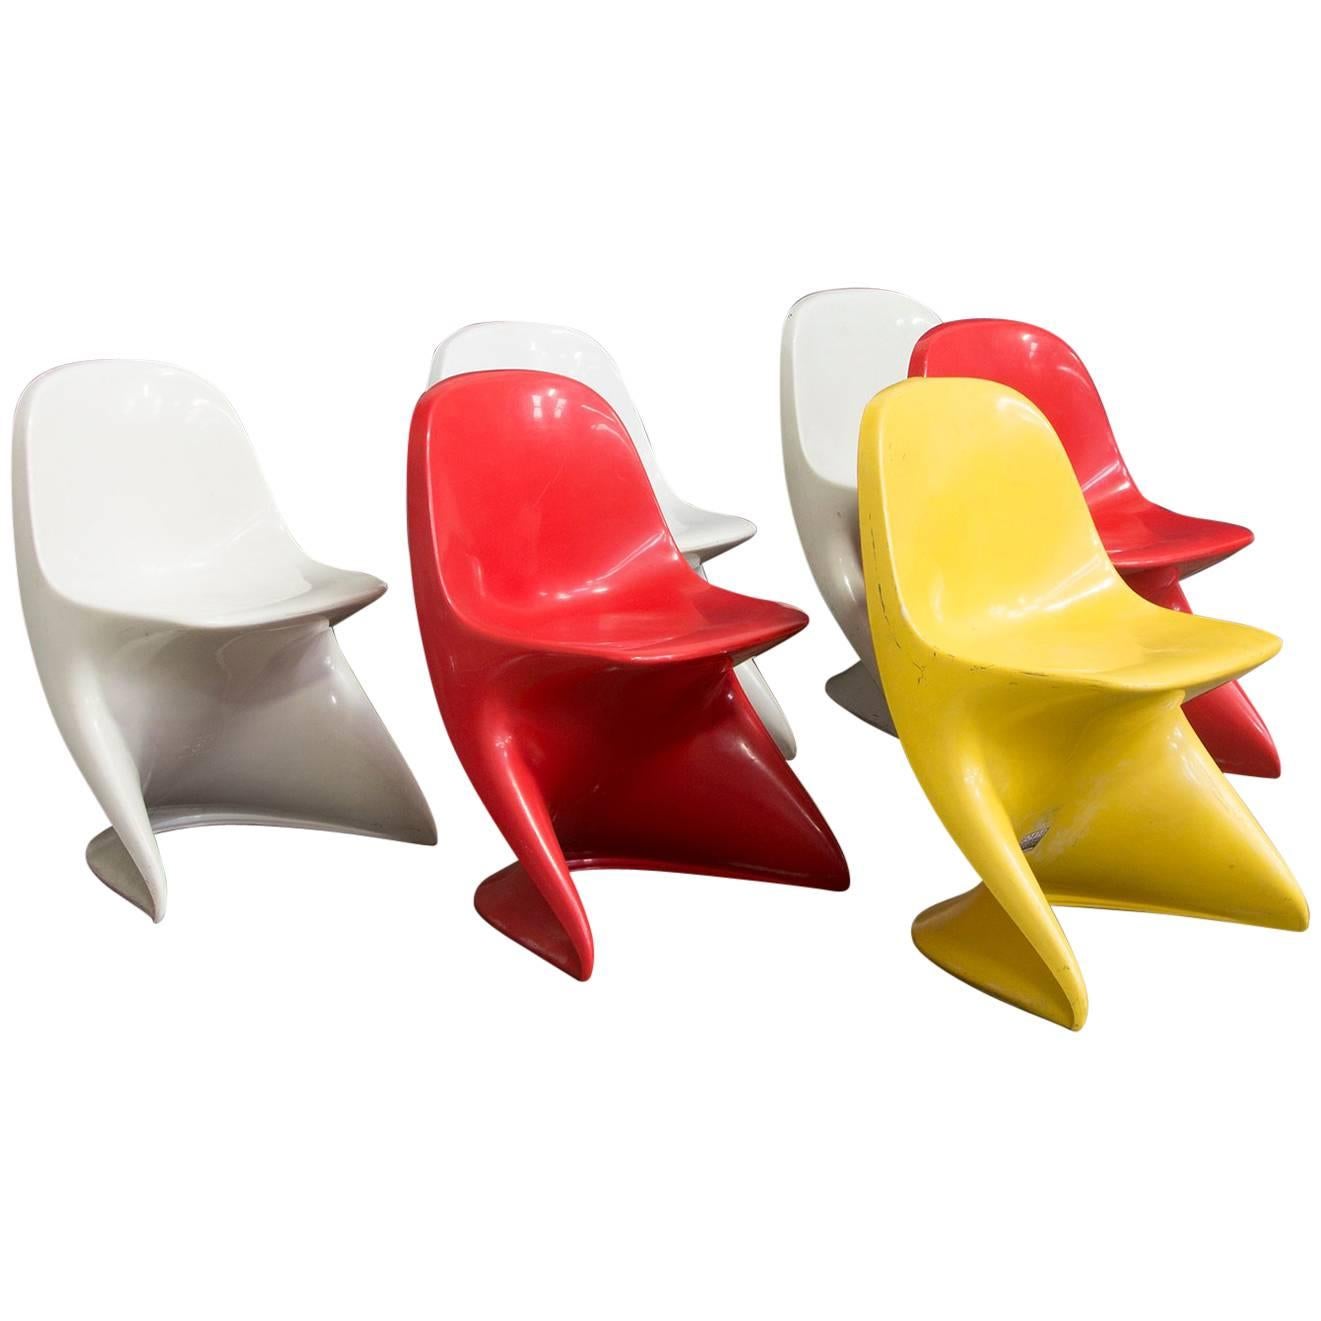 1977 Alexander Begge for Casala, Germany, Casalino Child Chairs